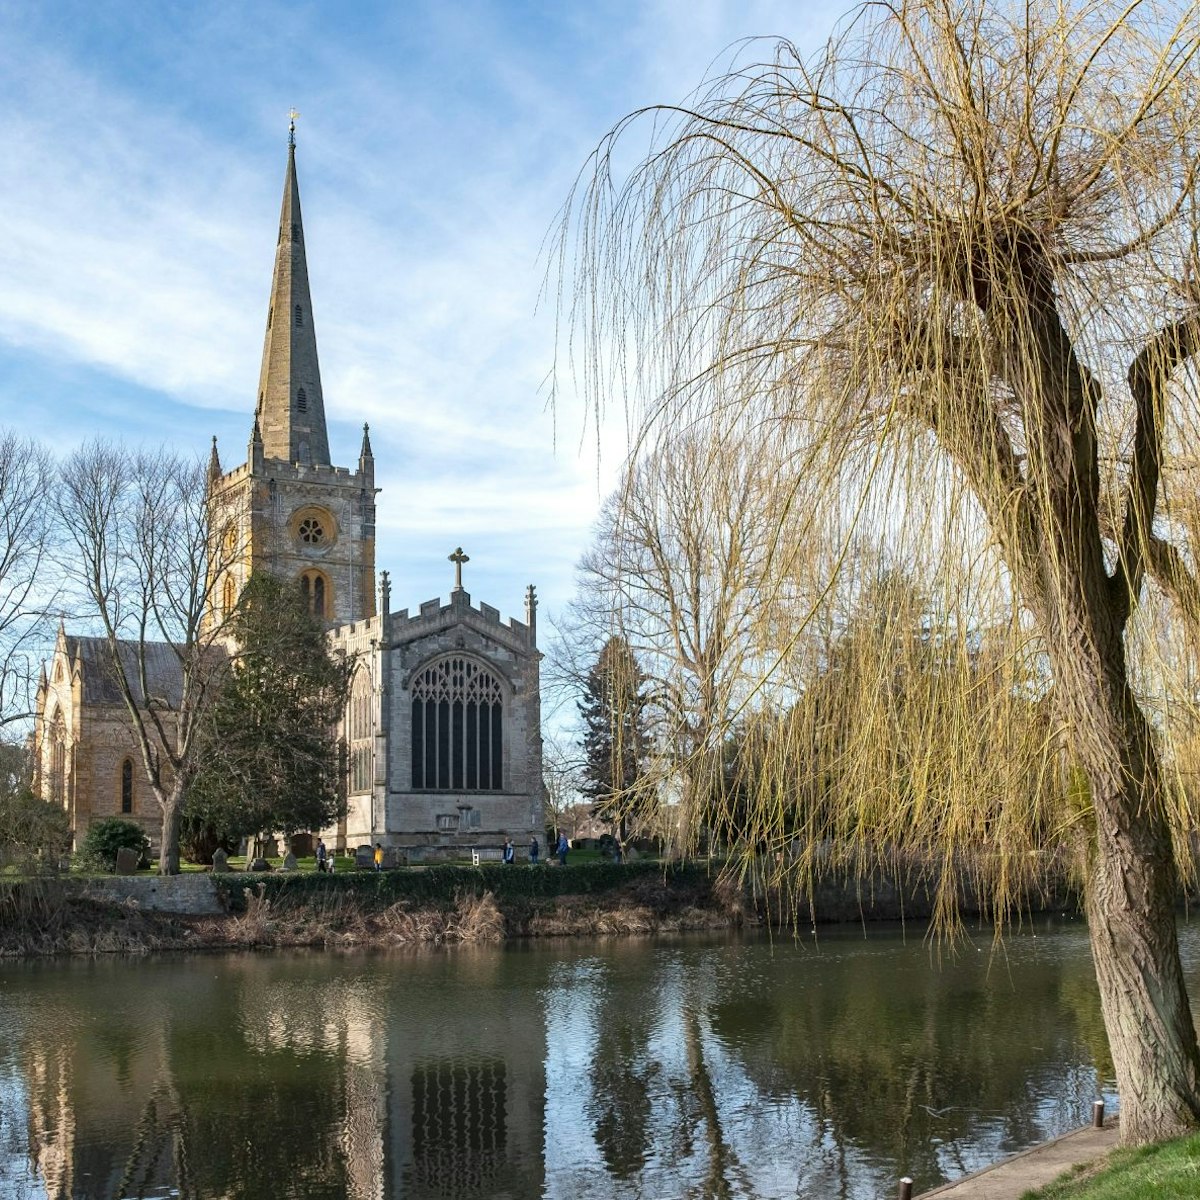 Holy Trinity Church on the banks of the river Avon in Stratford upon Avon, UK.  The grave of playright William Shakespeare is in the church.